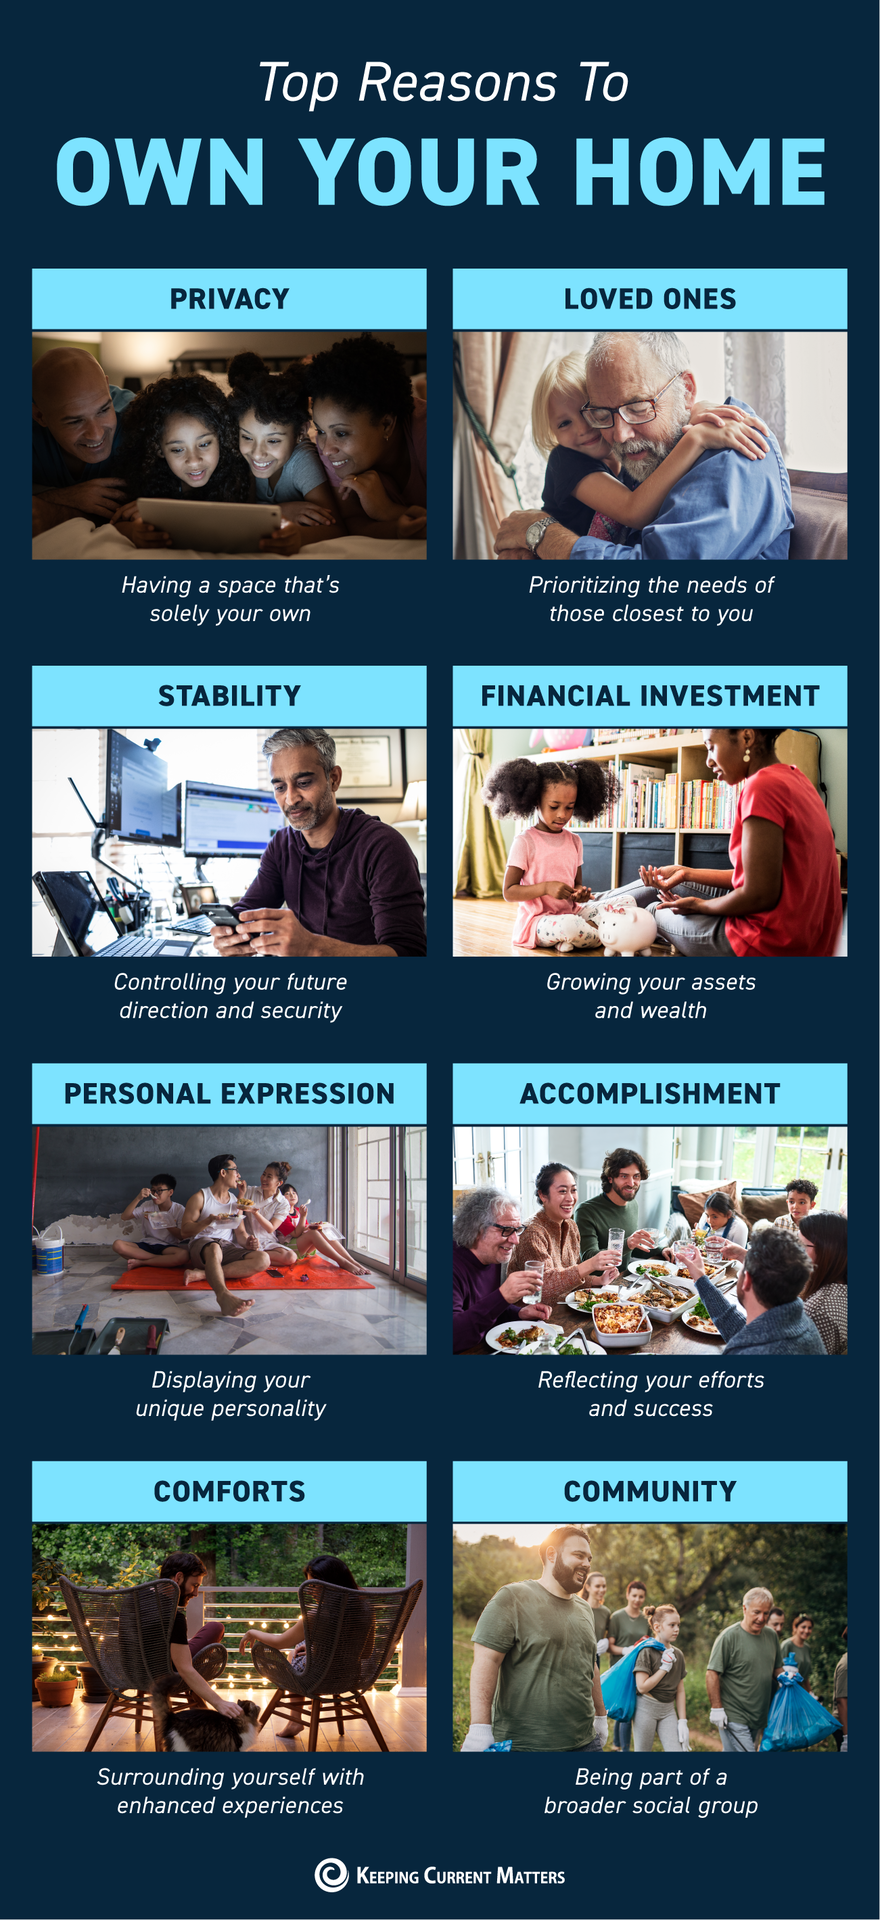 Top Reasons To Own Your Home [INFOGRAPHIC] | Keeping Current Matters